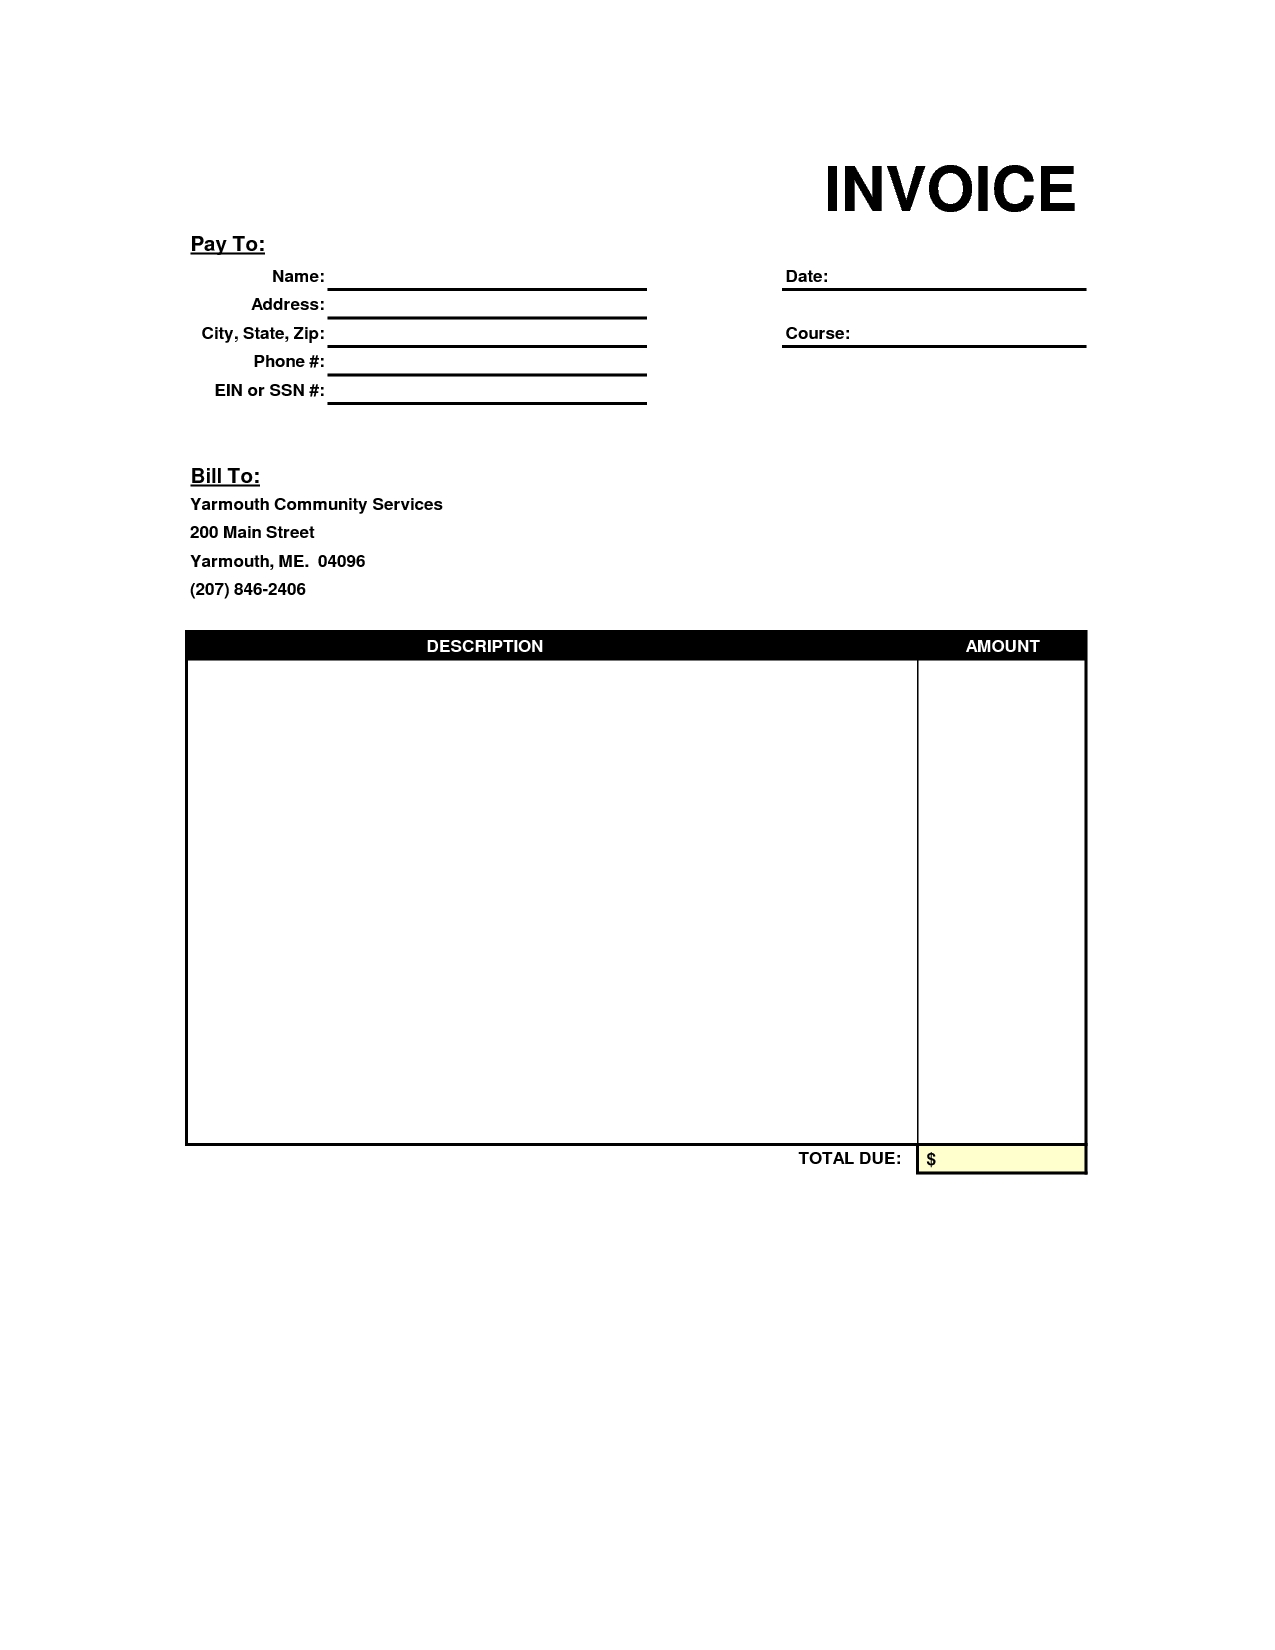 blank-invoices-to-print-invoice-template-ideas-17-blank-invoice-askxz